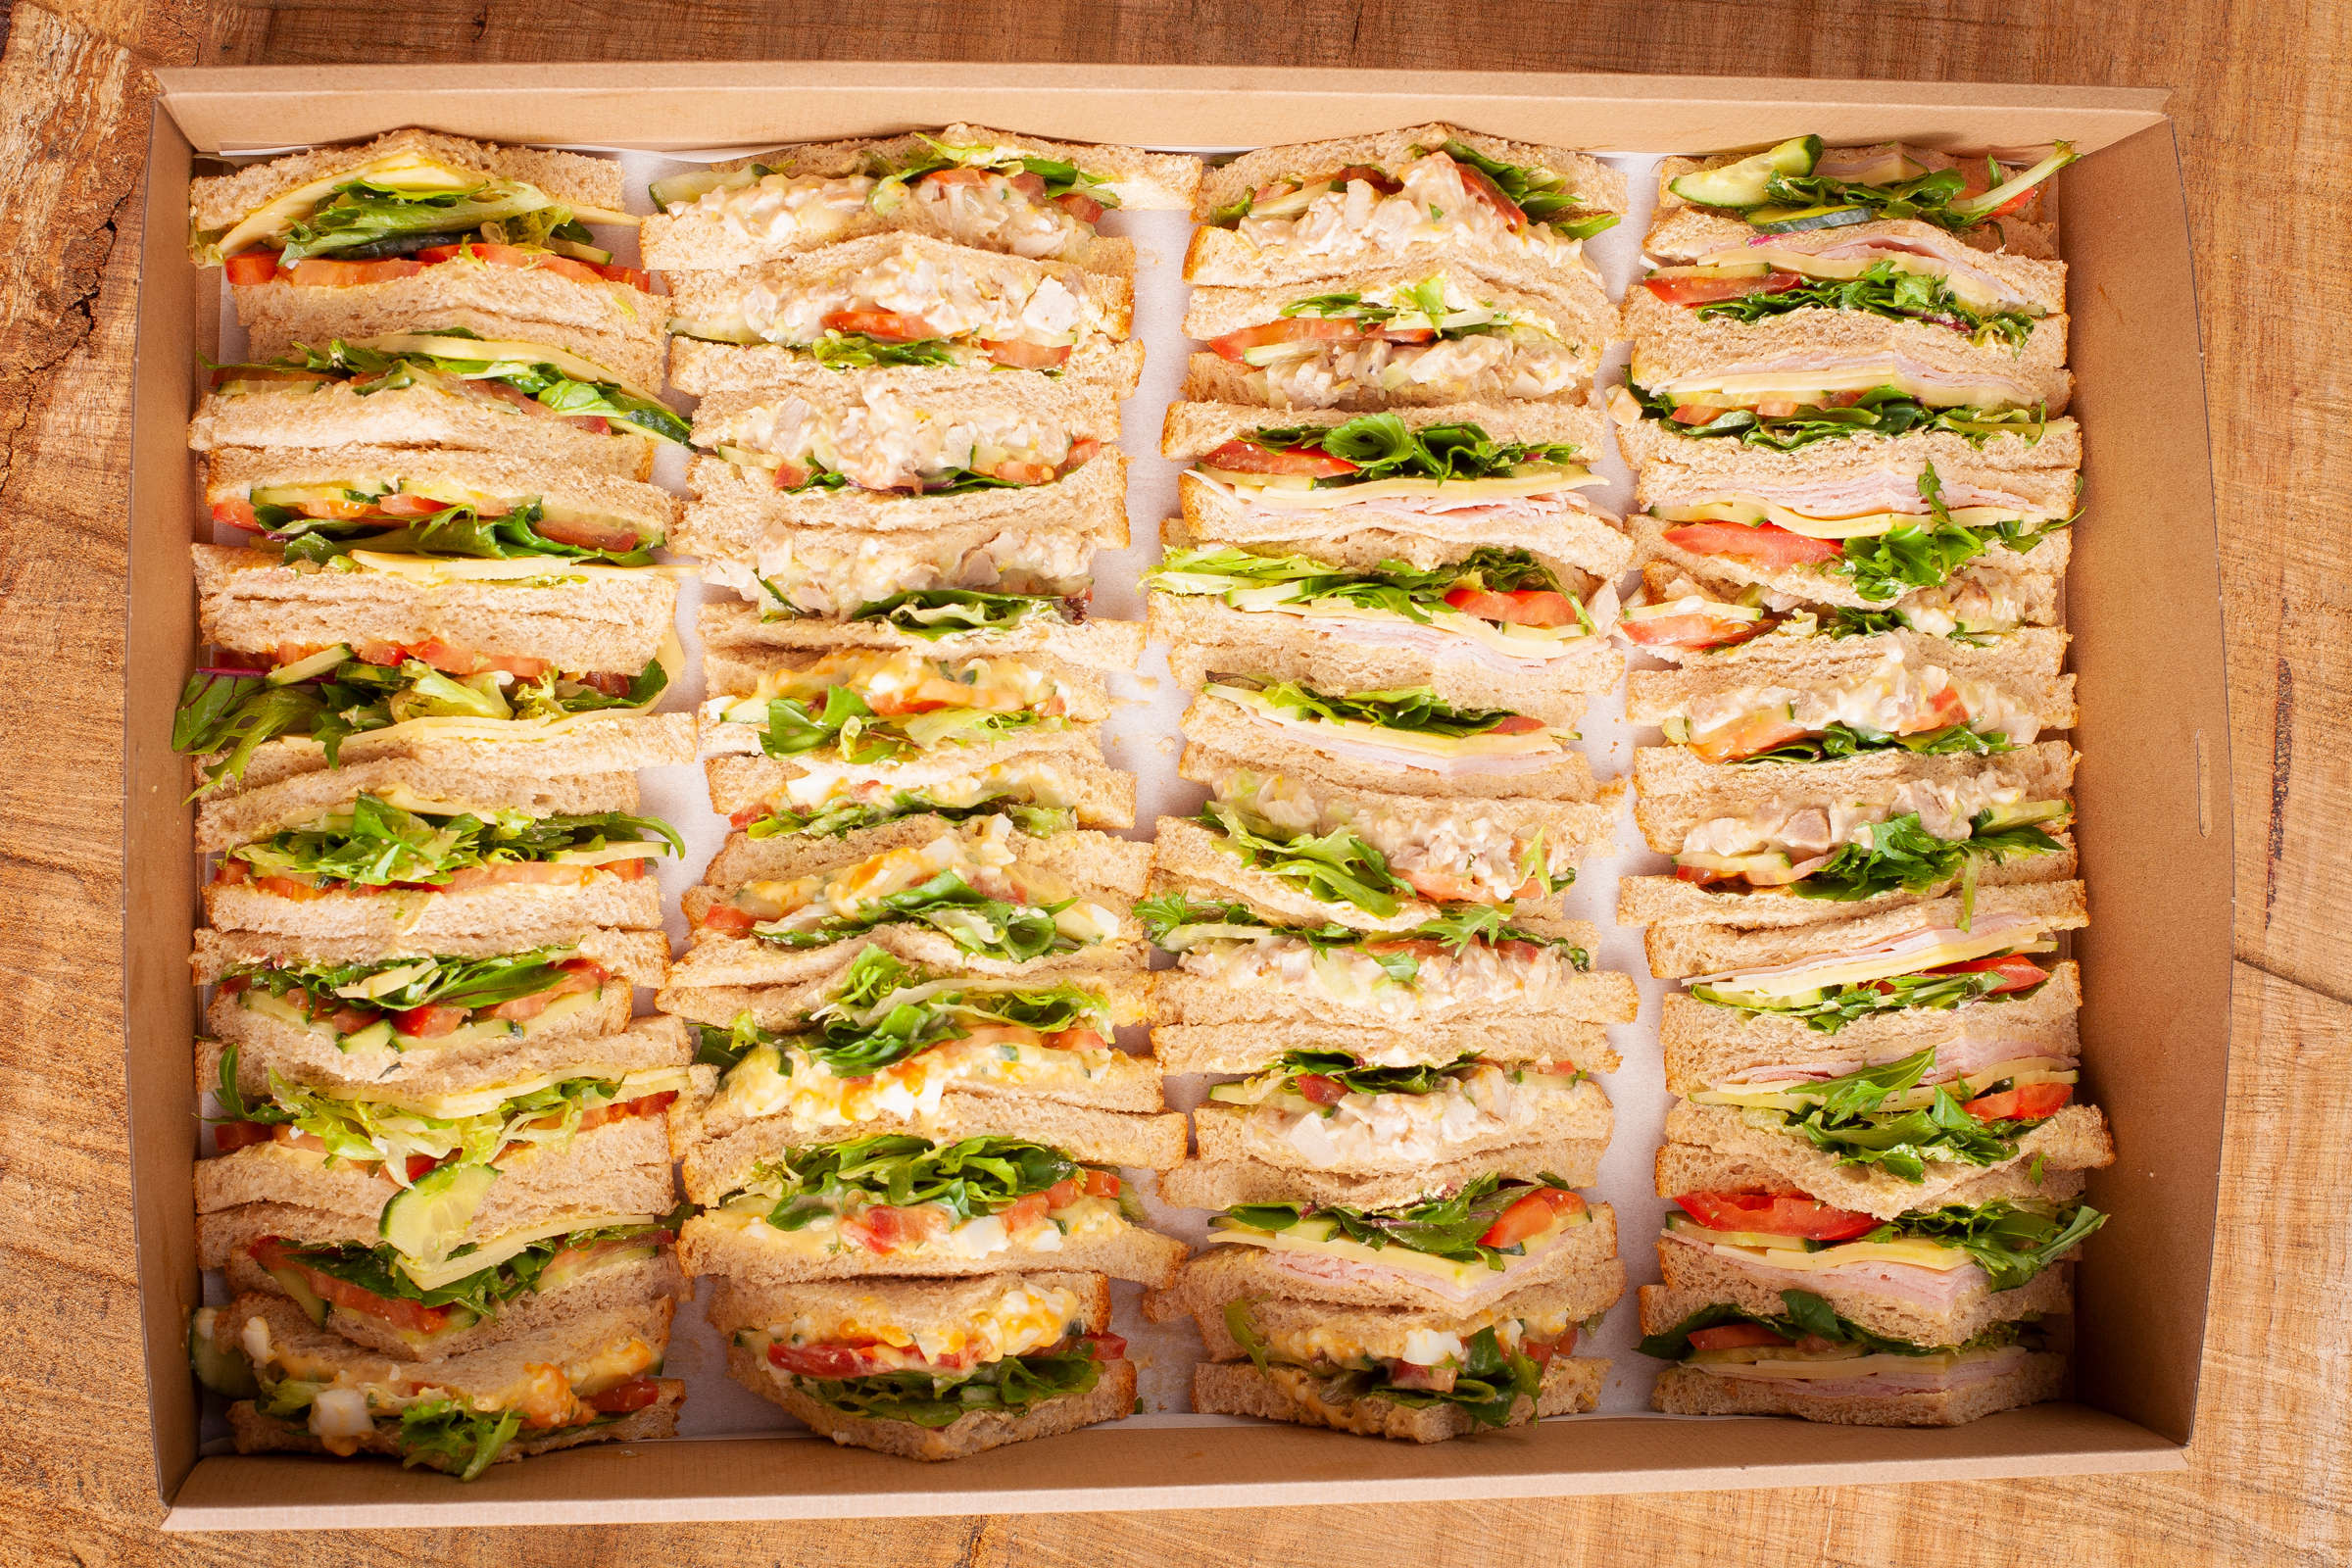 Mixed sandwich catering box containing 40 triangles, fillings include free range ham, vegetarian, free range chicken, egg and cheese all with assorted salad Credit: Richard Jupe.